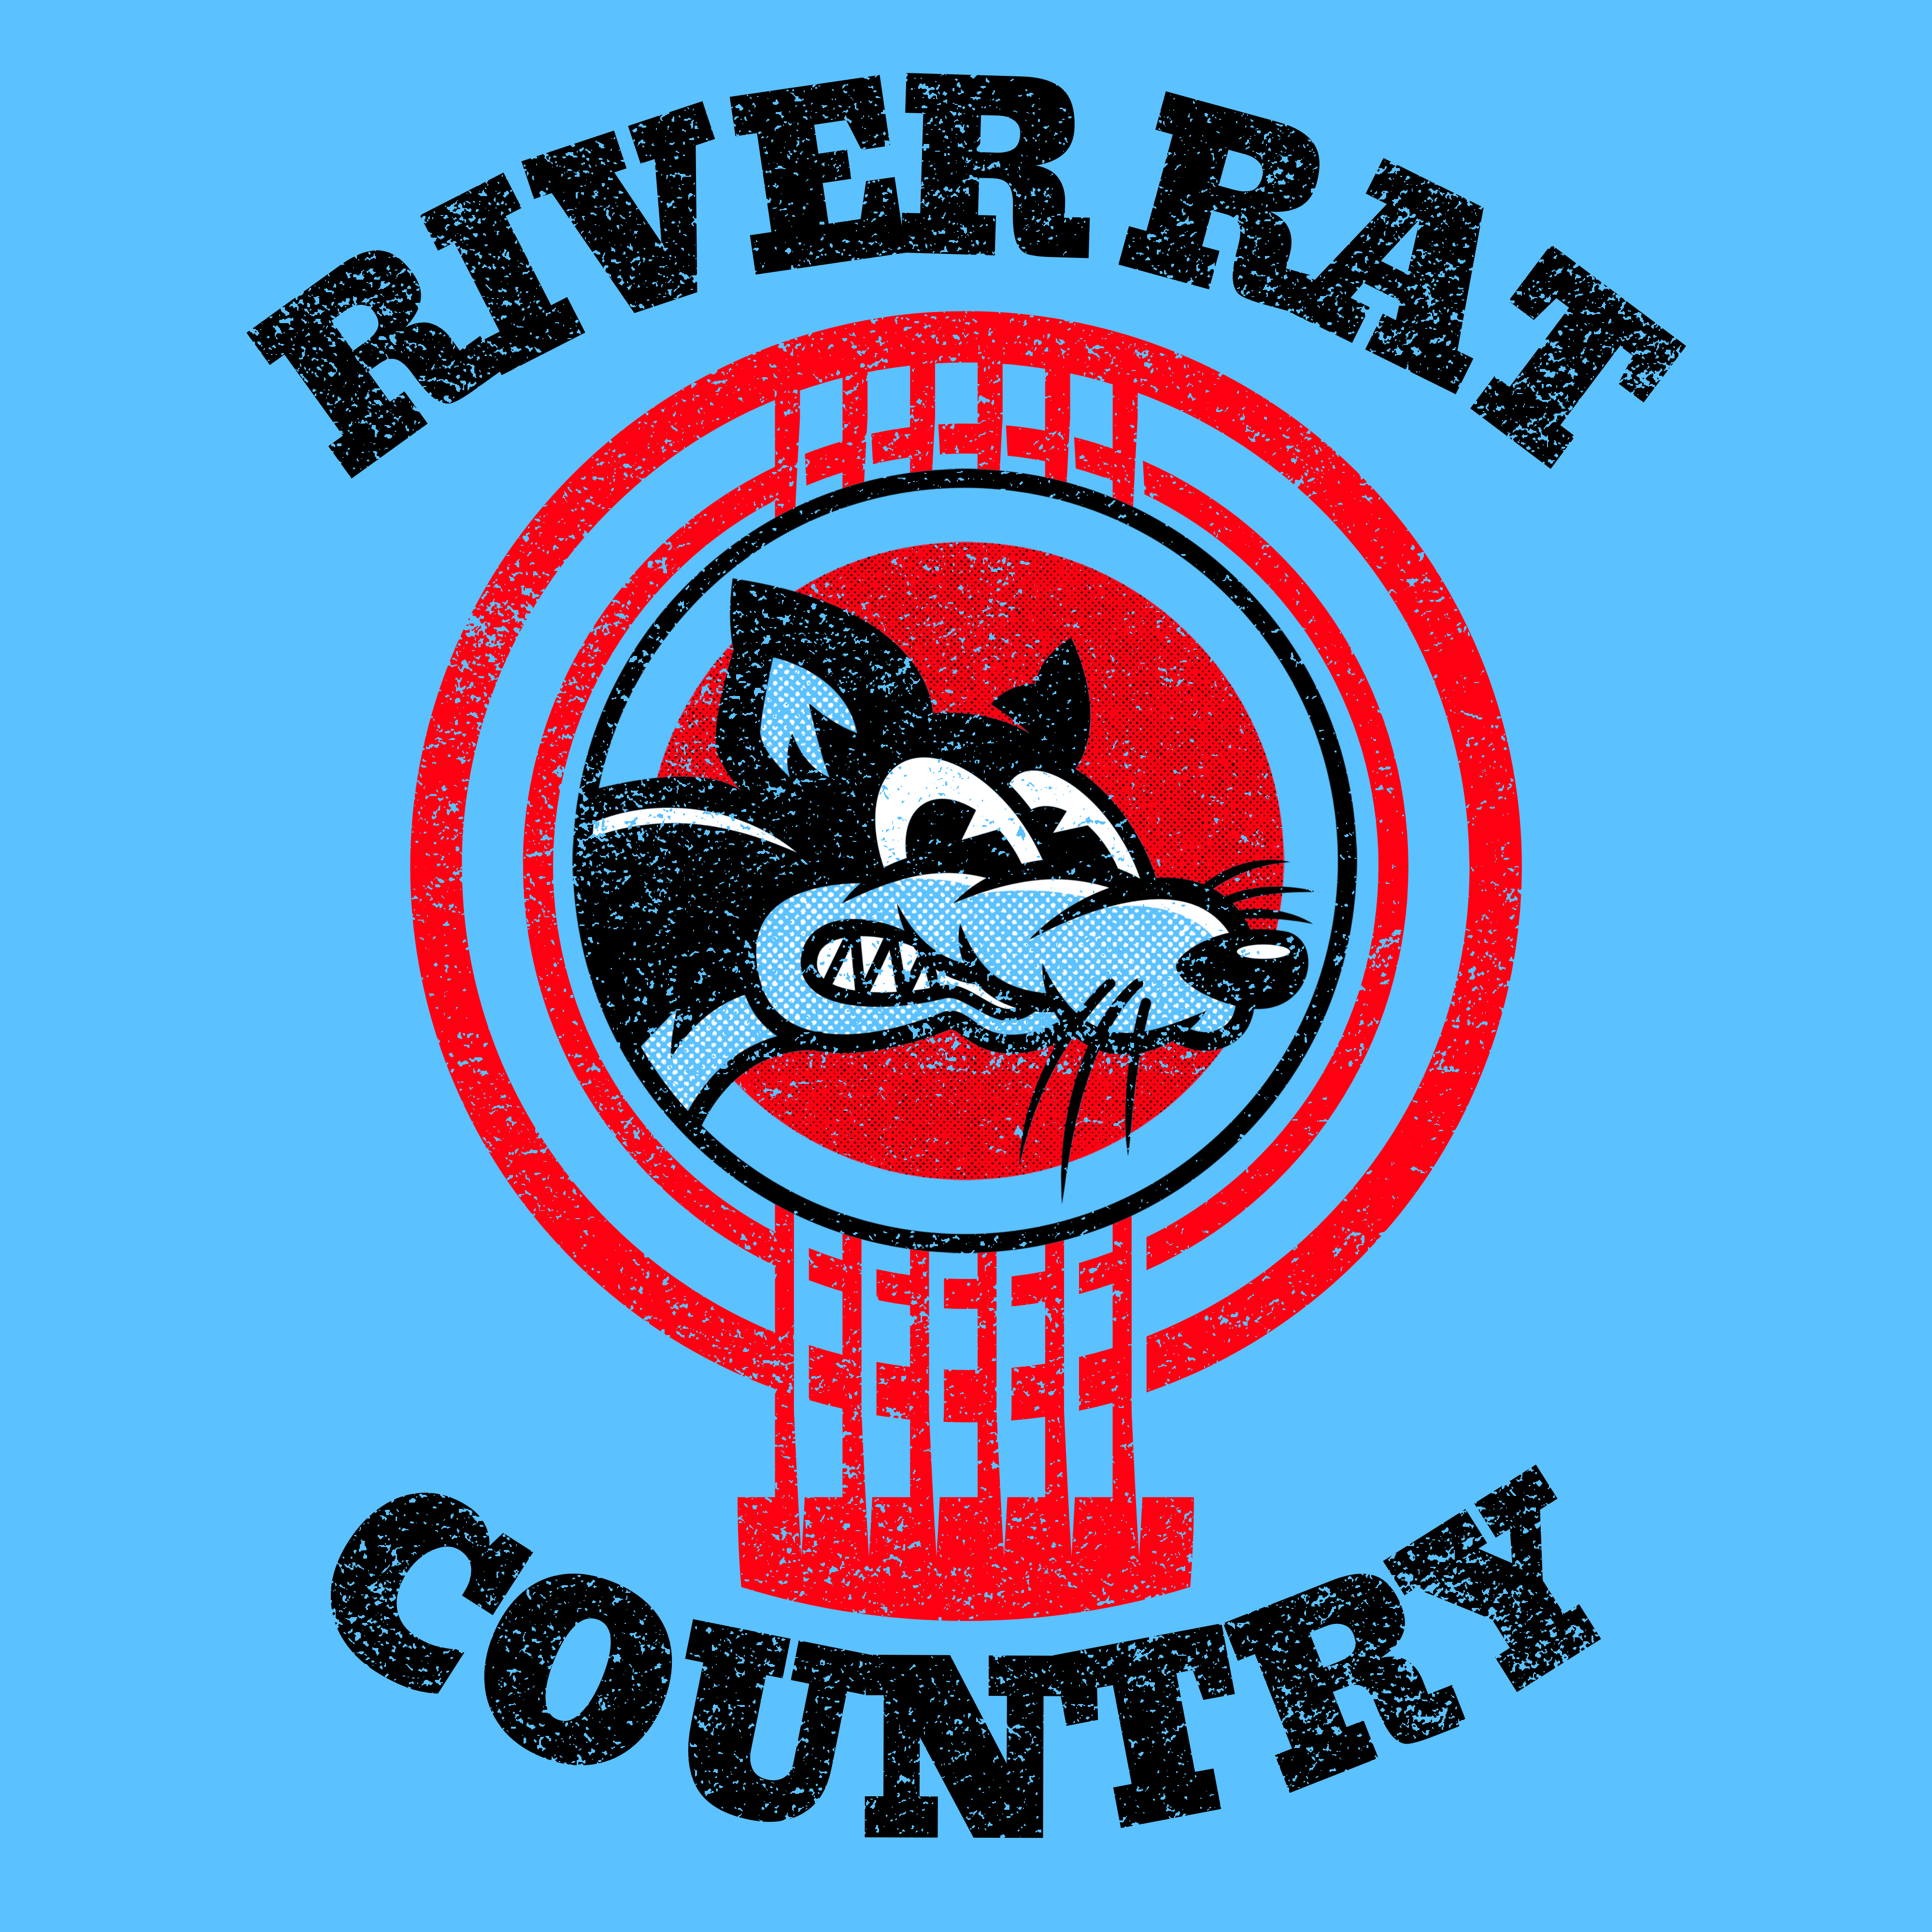 River Rat Country